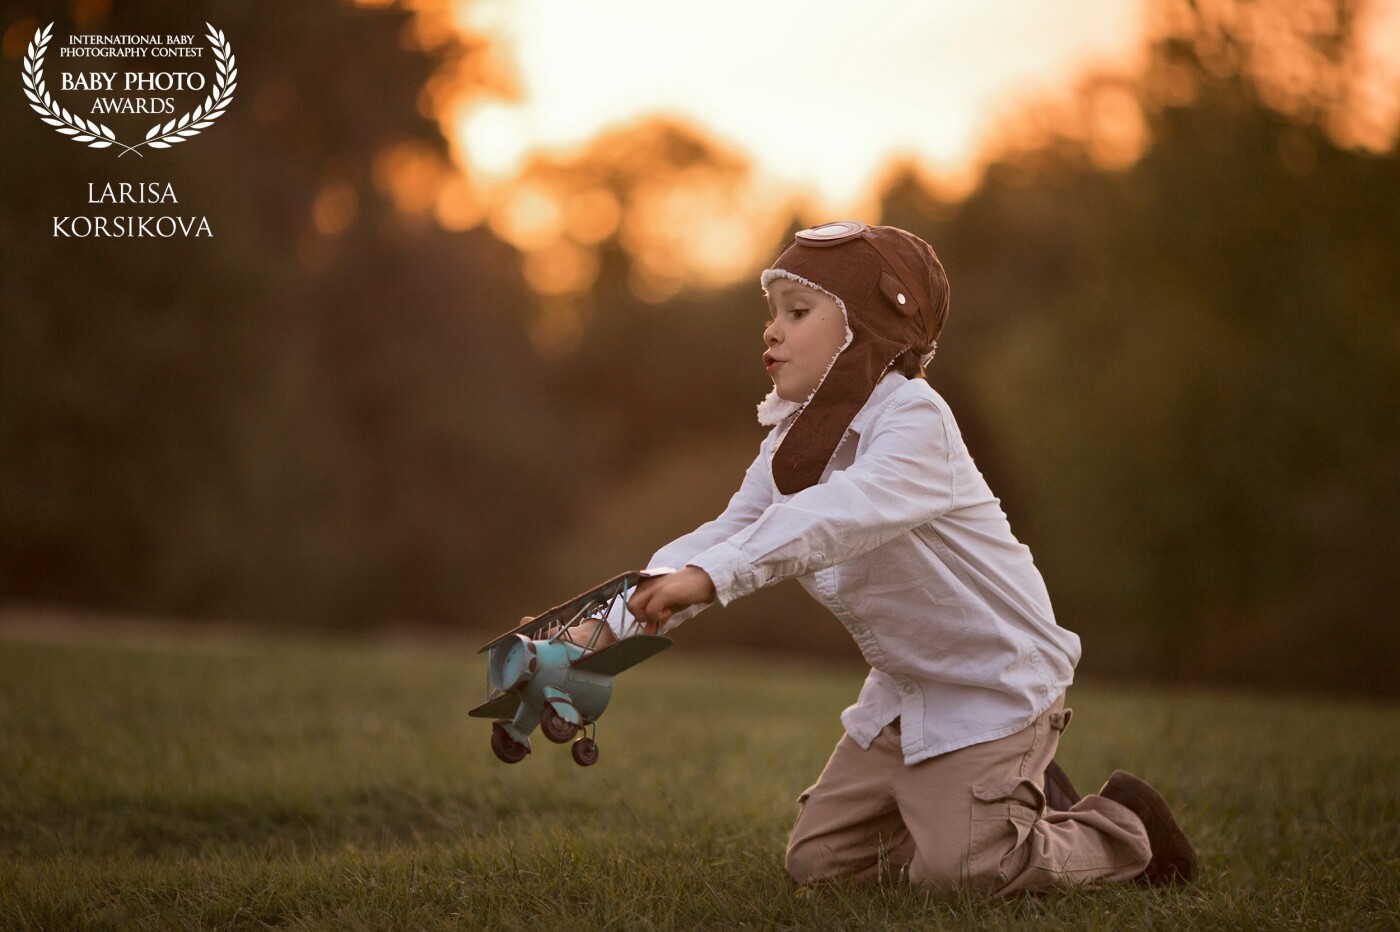 My son Daniel. I like to take pictures with vintage accessories and the style of the 30s. This picture was taken around 7-8 pm at the park (time of sunset).